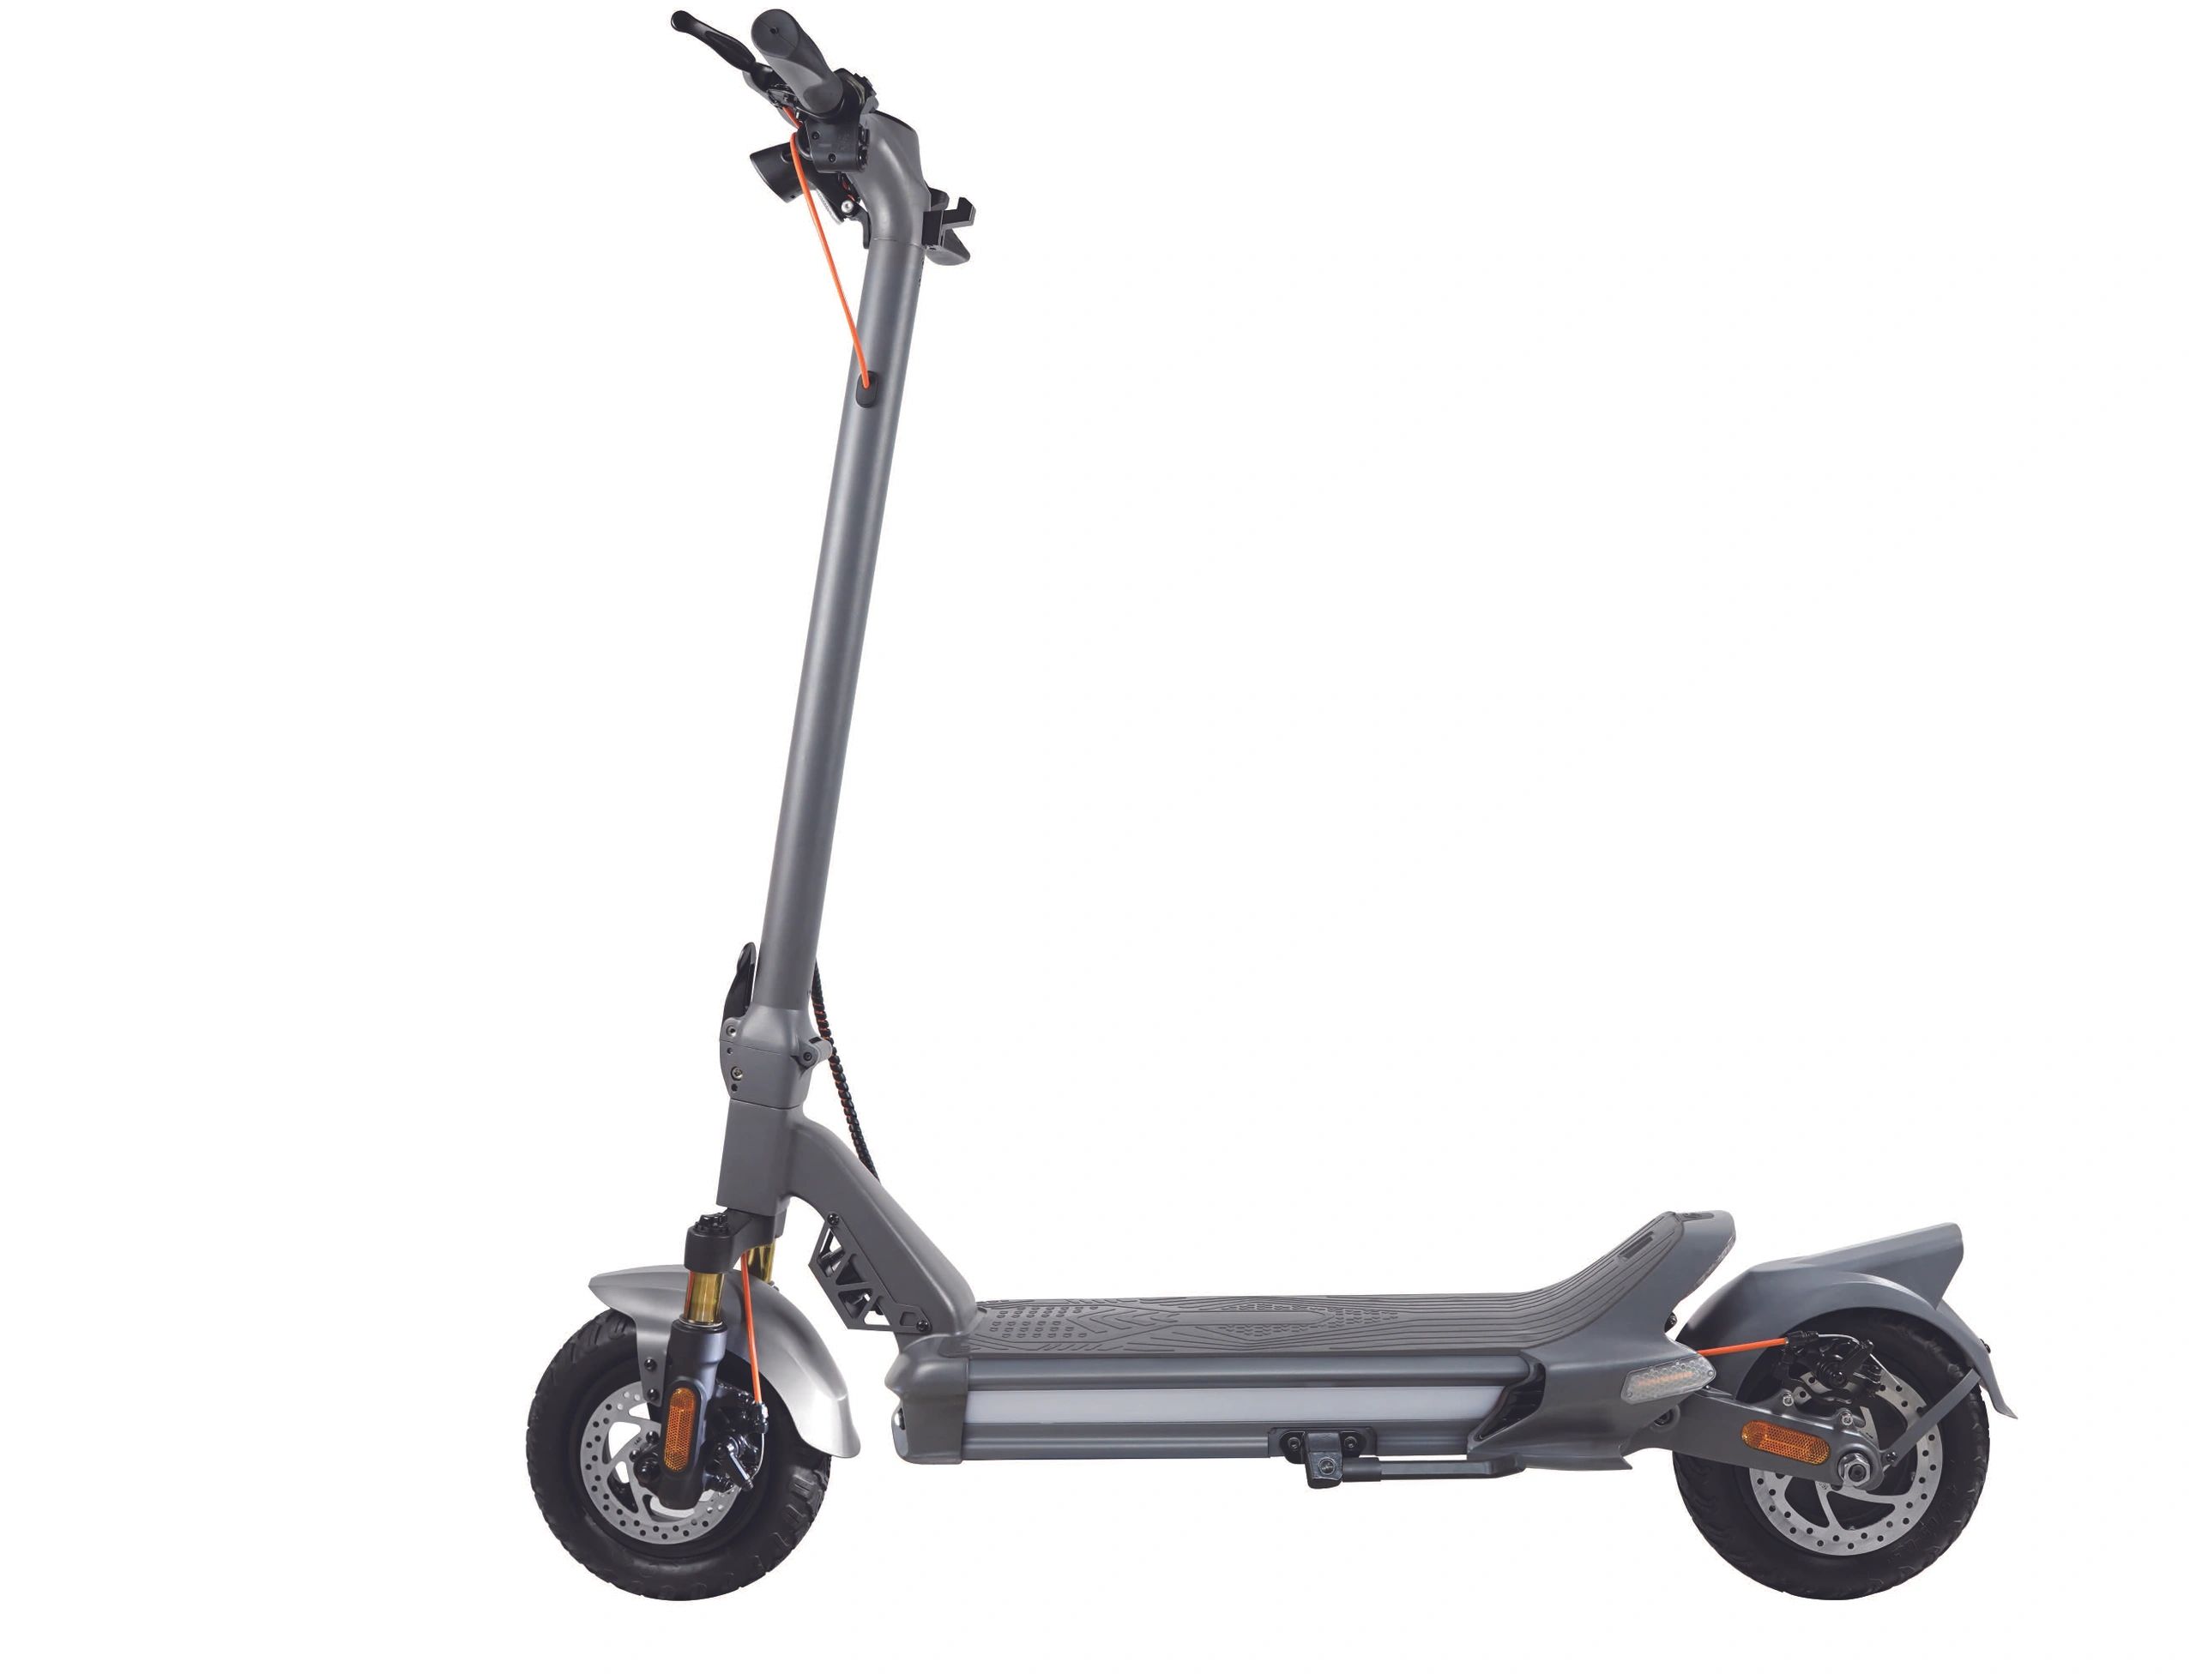 Product  CUNFON Electric Scooters Offcial Site